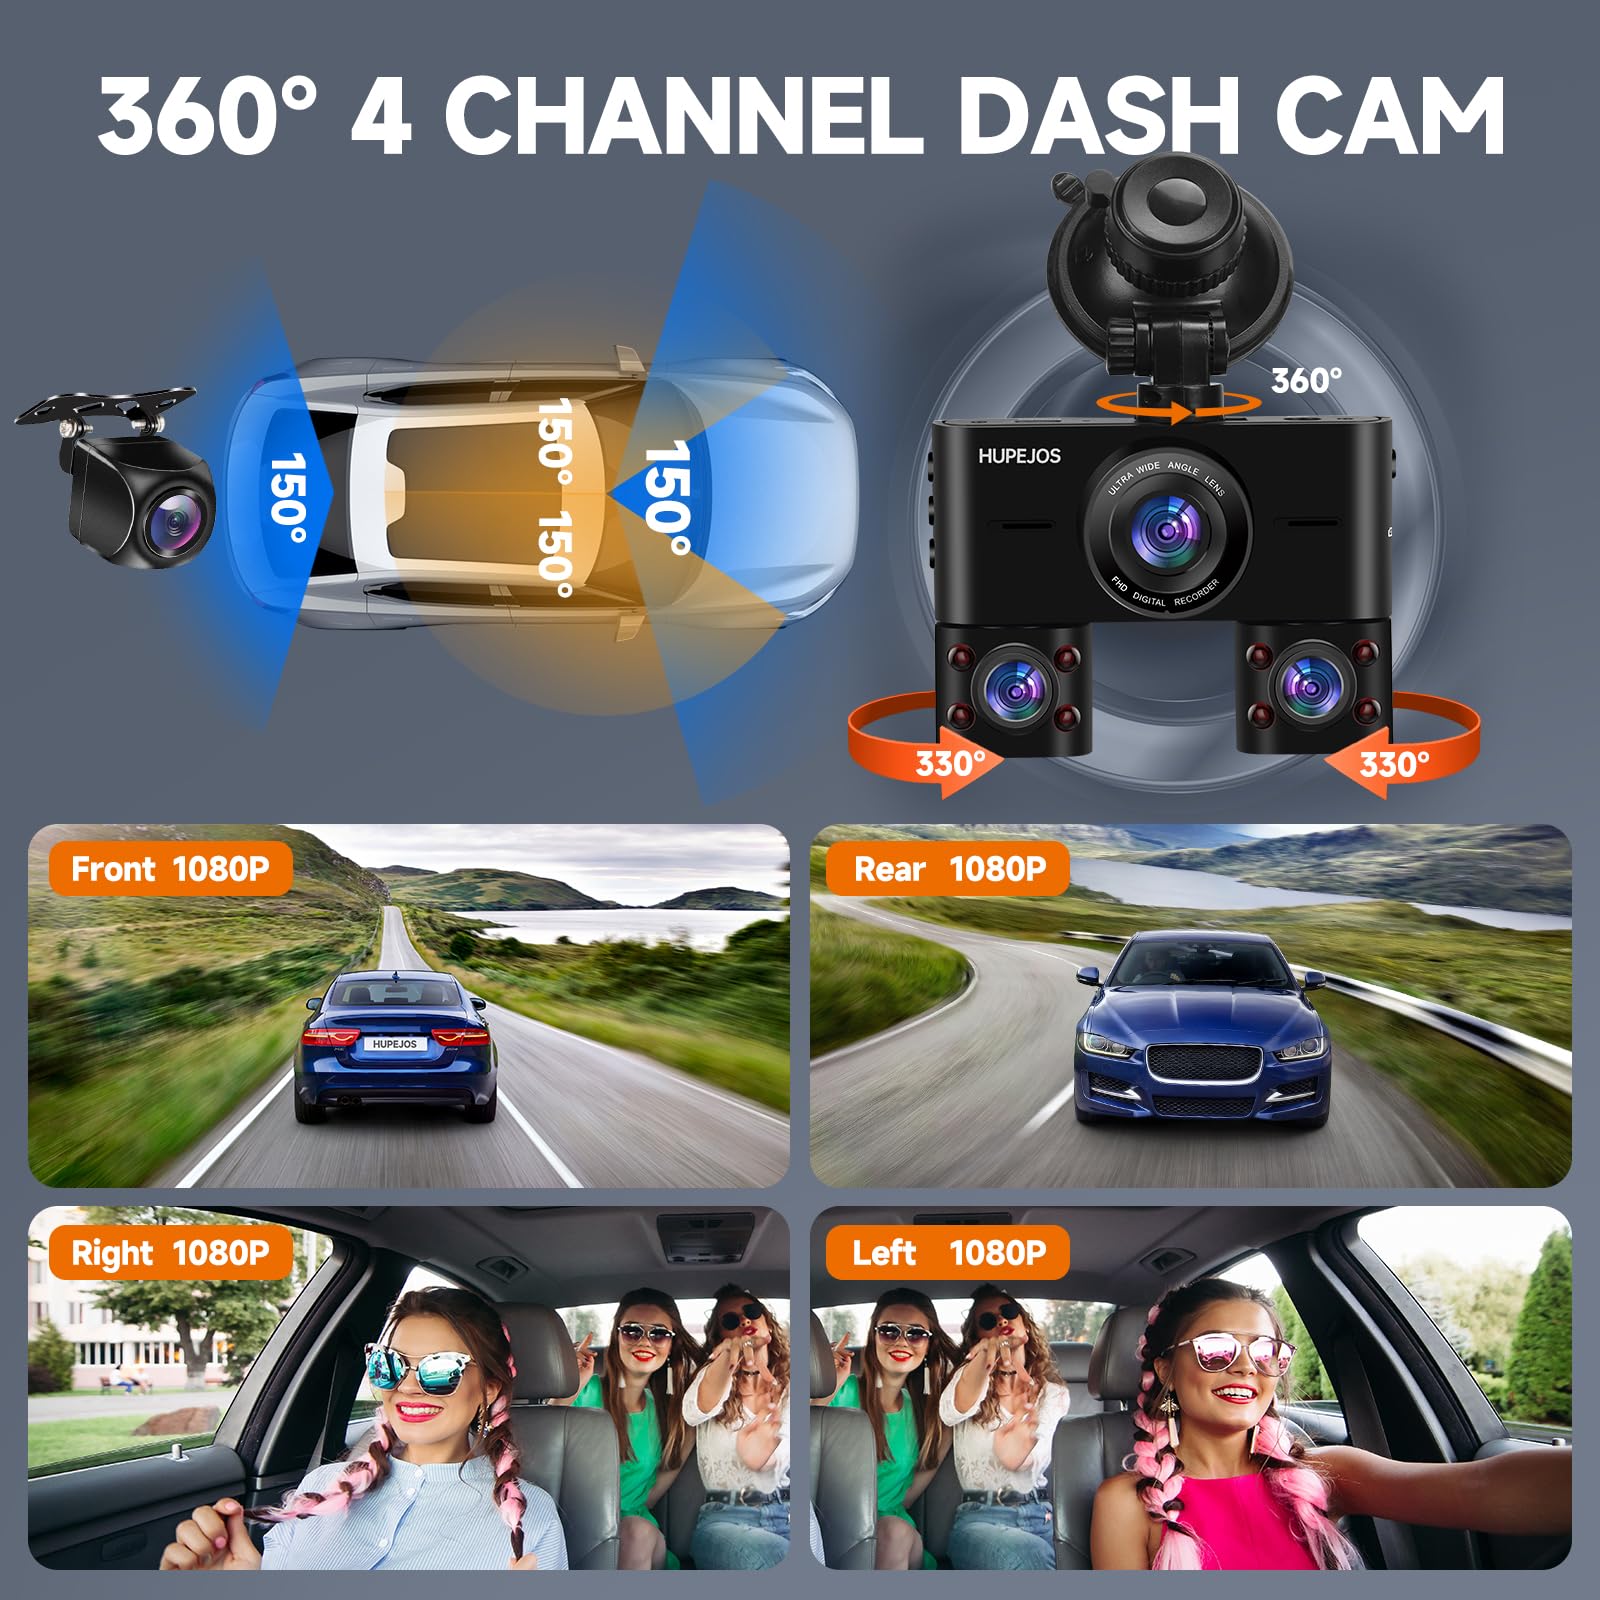 Hupejos 360 Dash Cam Front and Rear Inside, 4 Channel Dash Camera for Cars FHD 1080Px4, Built-in Wi-Fi, 3.16” IPS Screen, Voice Control, Night Vision, Free 64GB Card, 24H Parking Mode